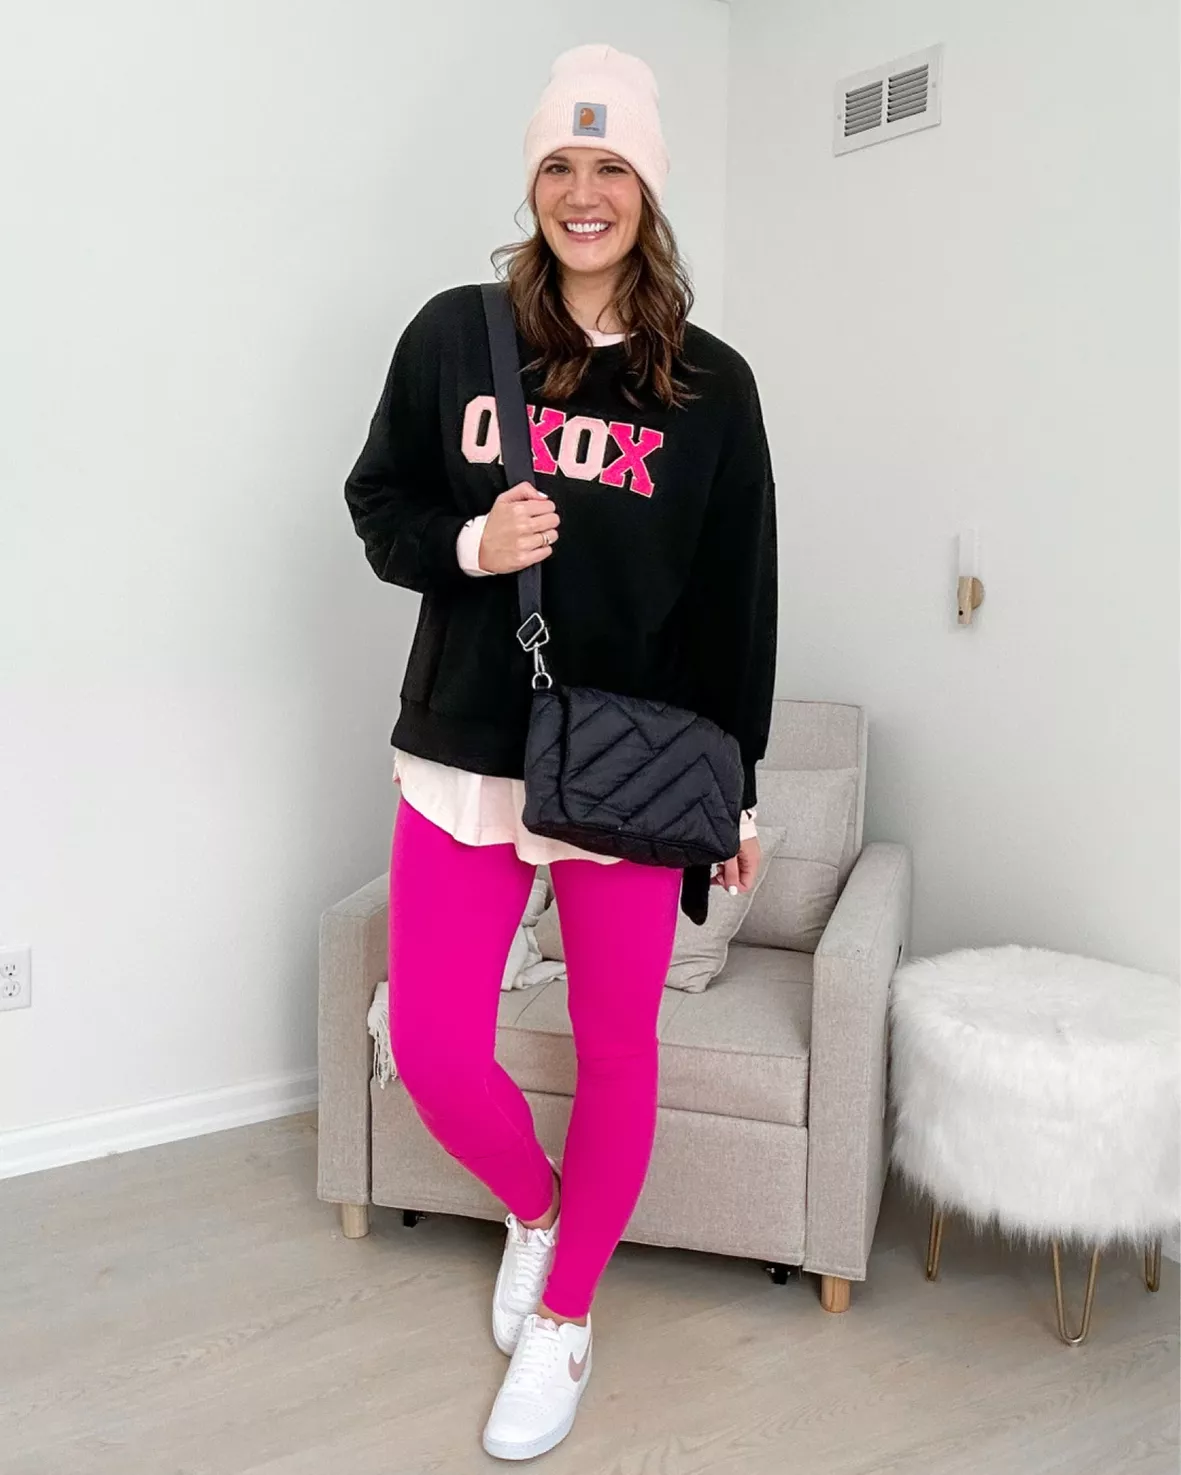 Hot Pink Leggings Outfits (2 ideas & outfits)